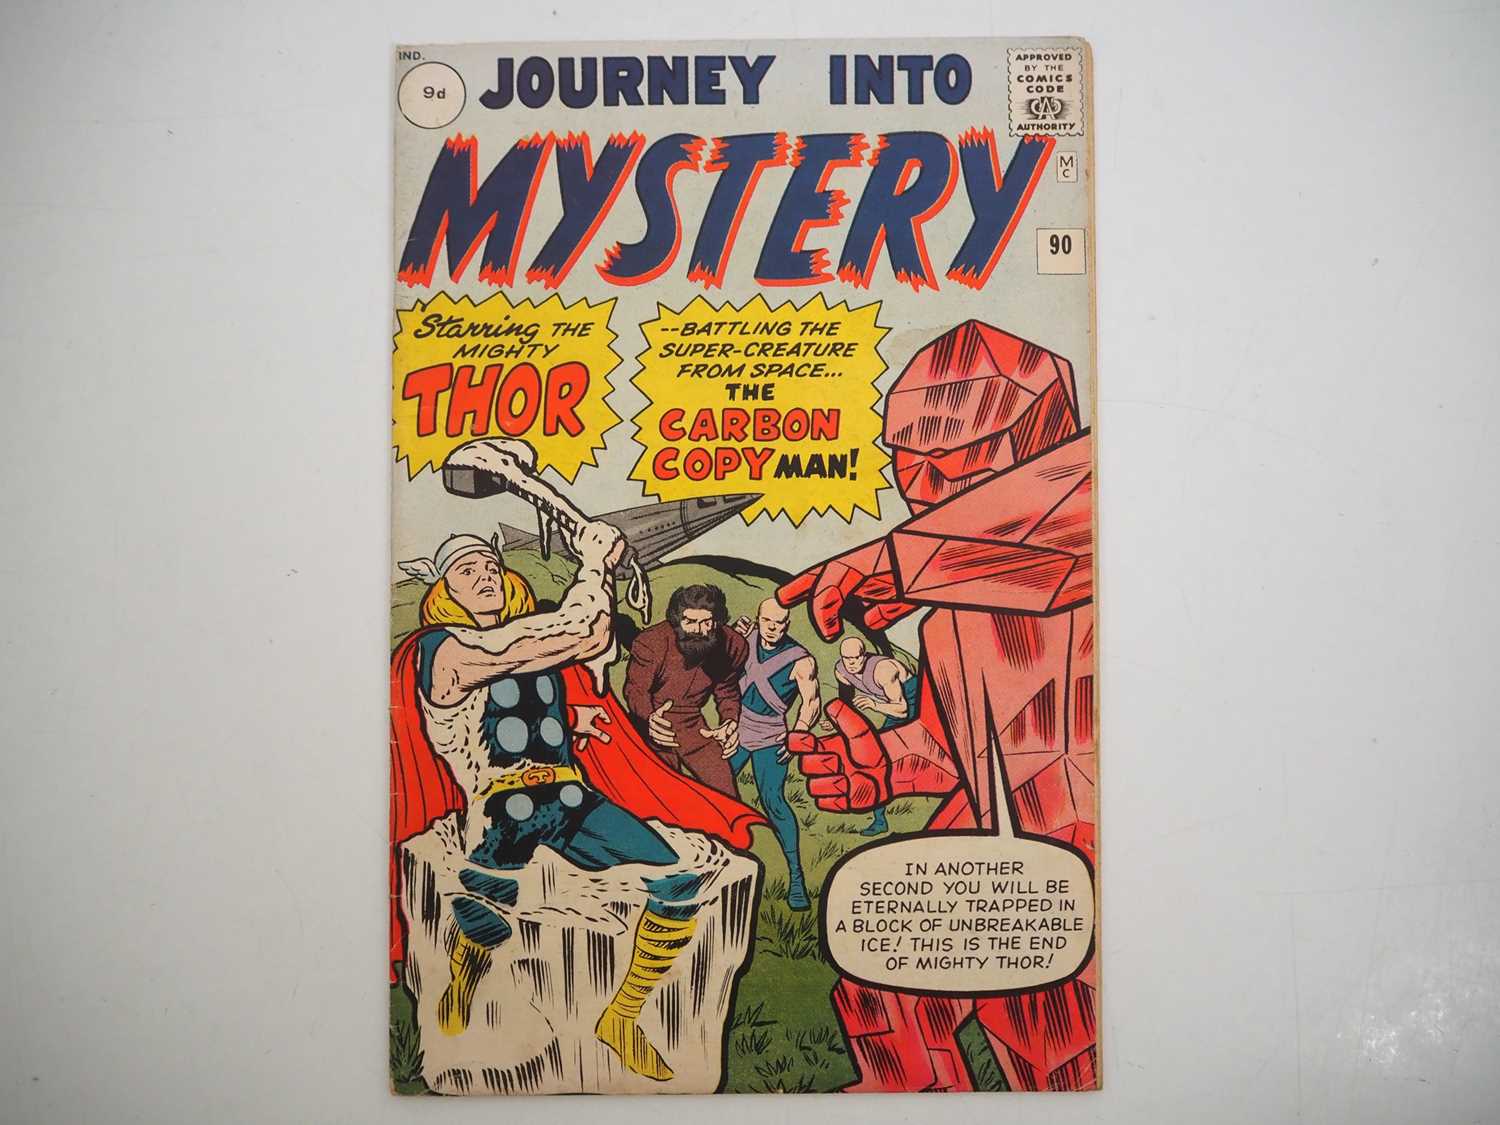 JOURNEY INTO MYSTERY #90 (1963 - MARVEL) - The first team appearance of Xartans with cover art by